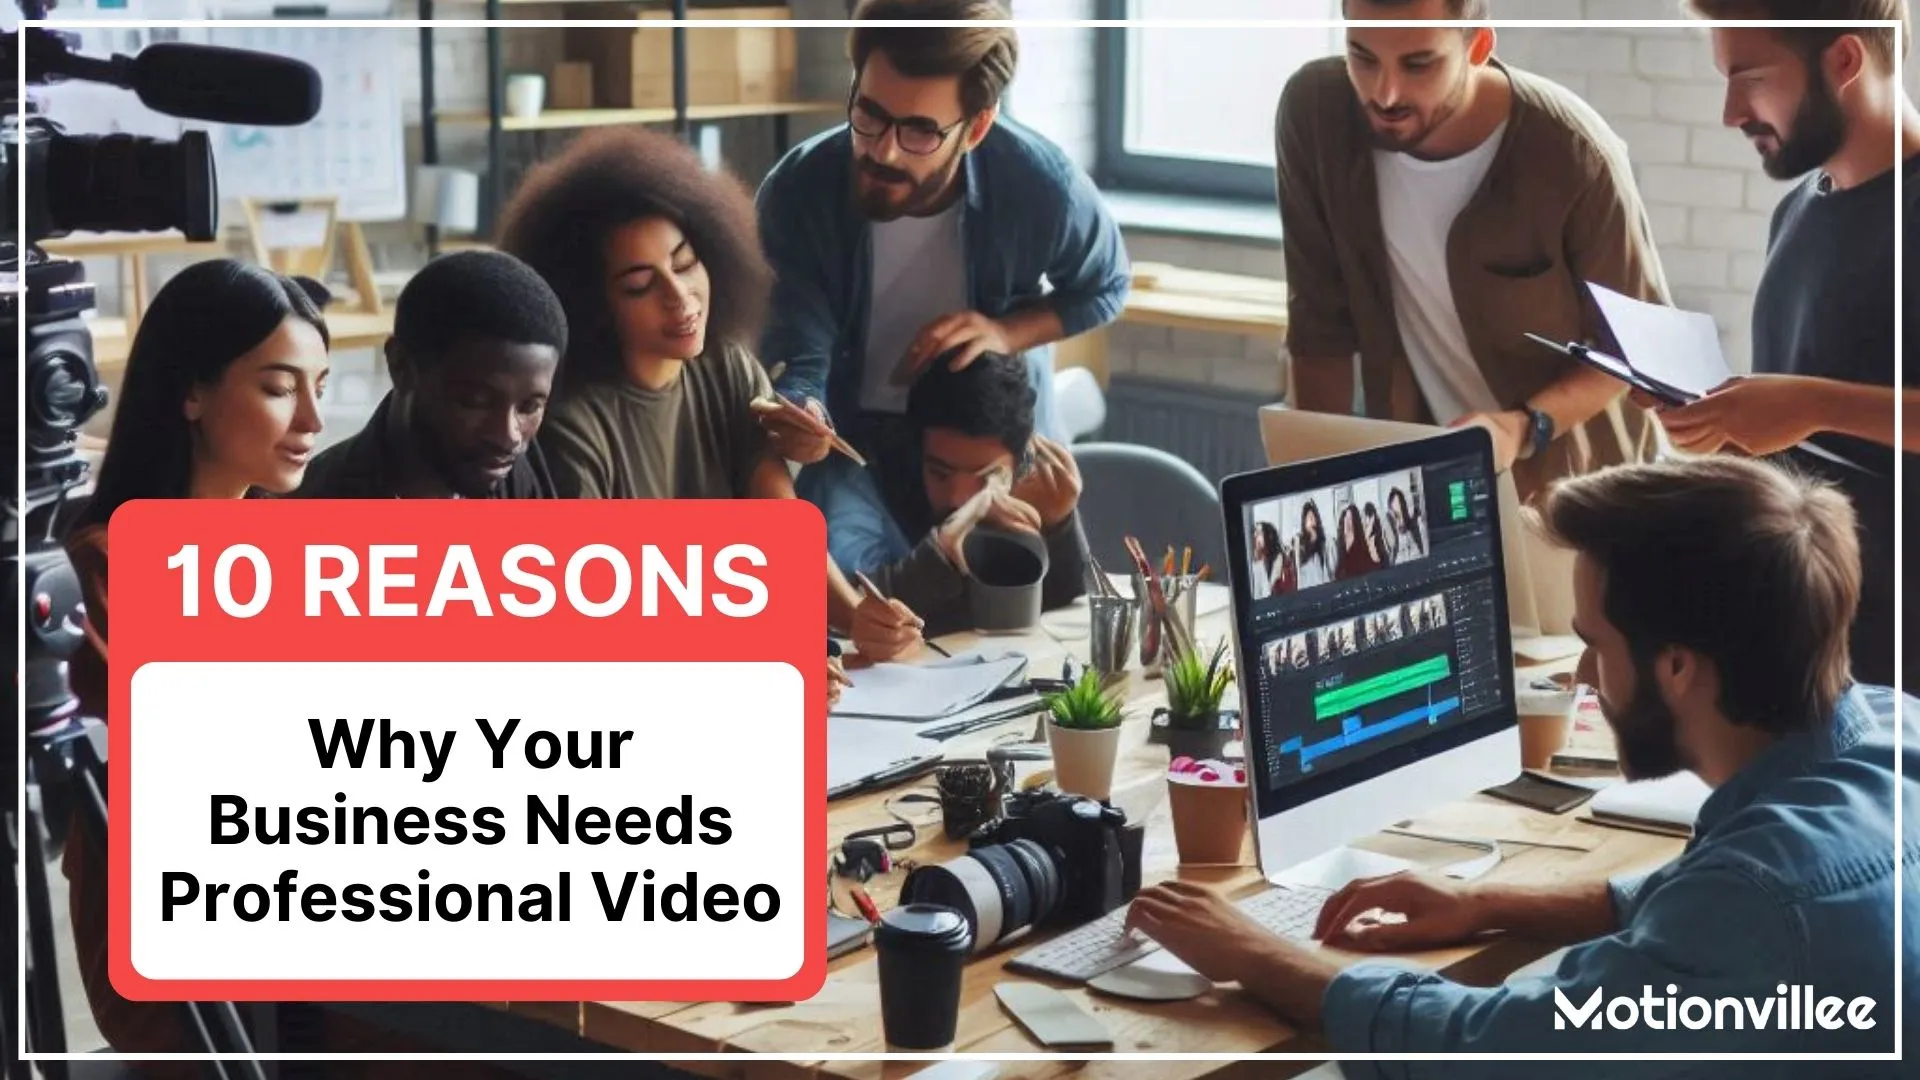 10 reasons why your business need professional video